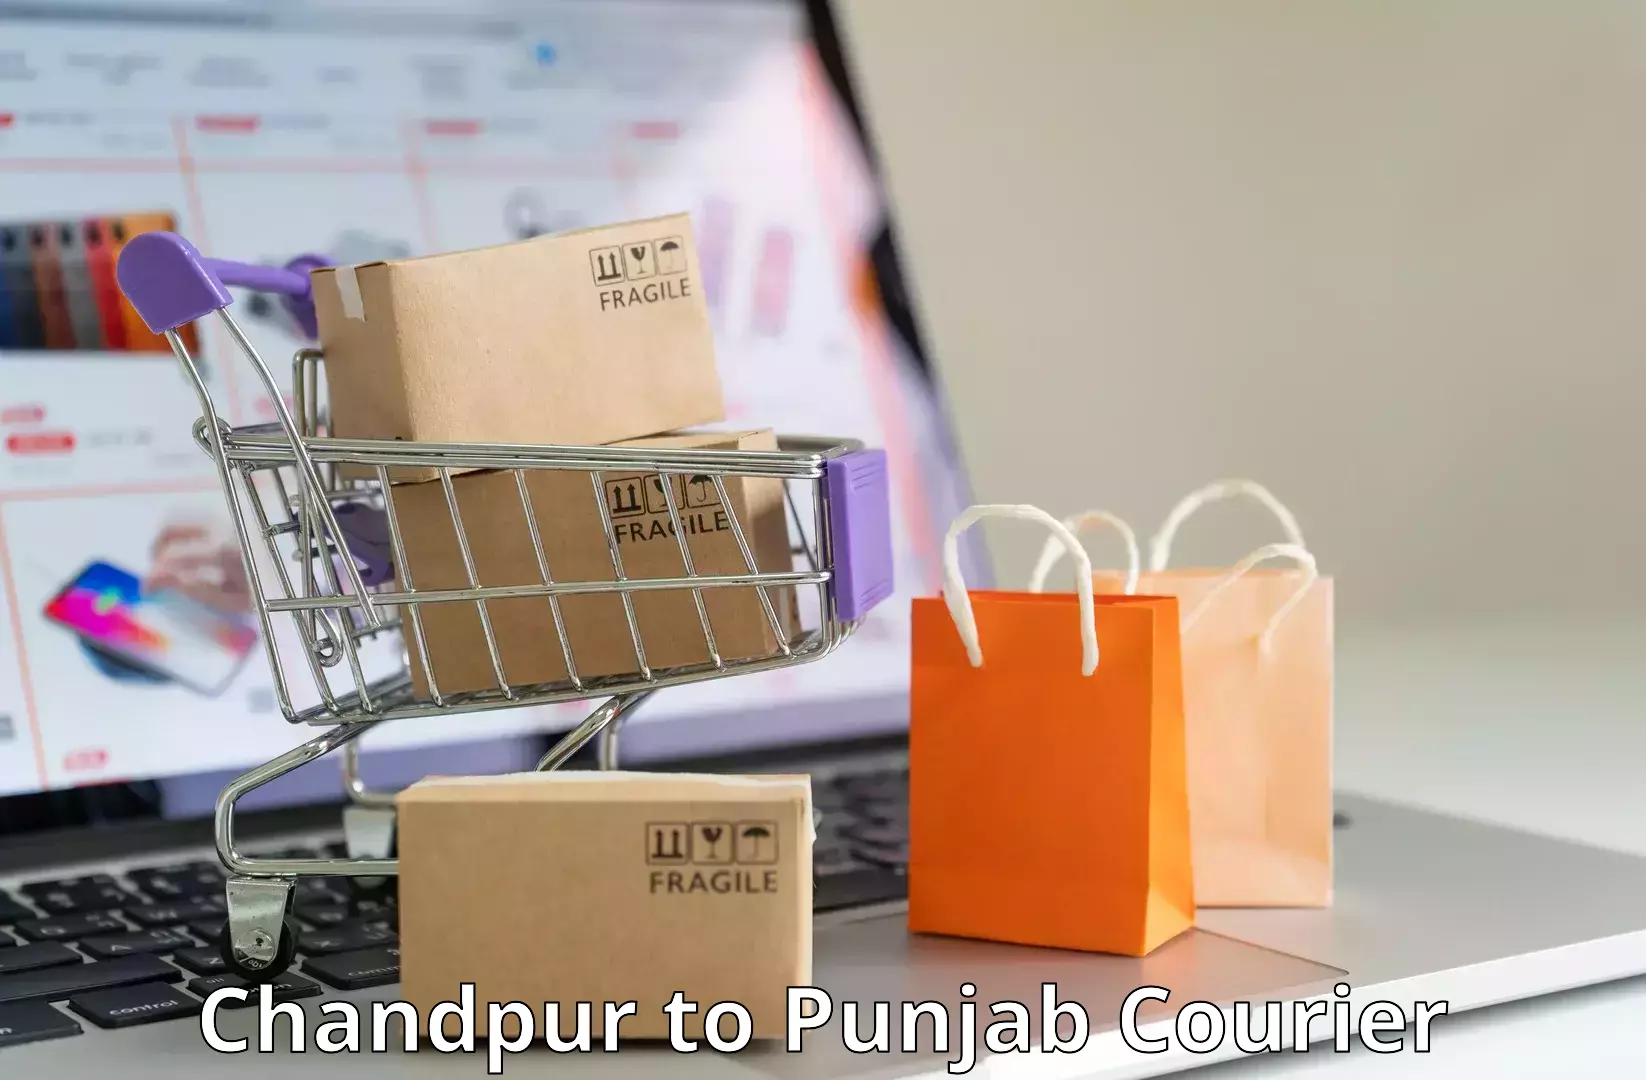 Quality courier services in Chandpur to Moga